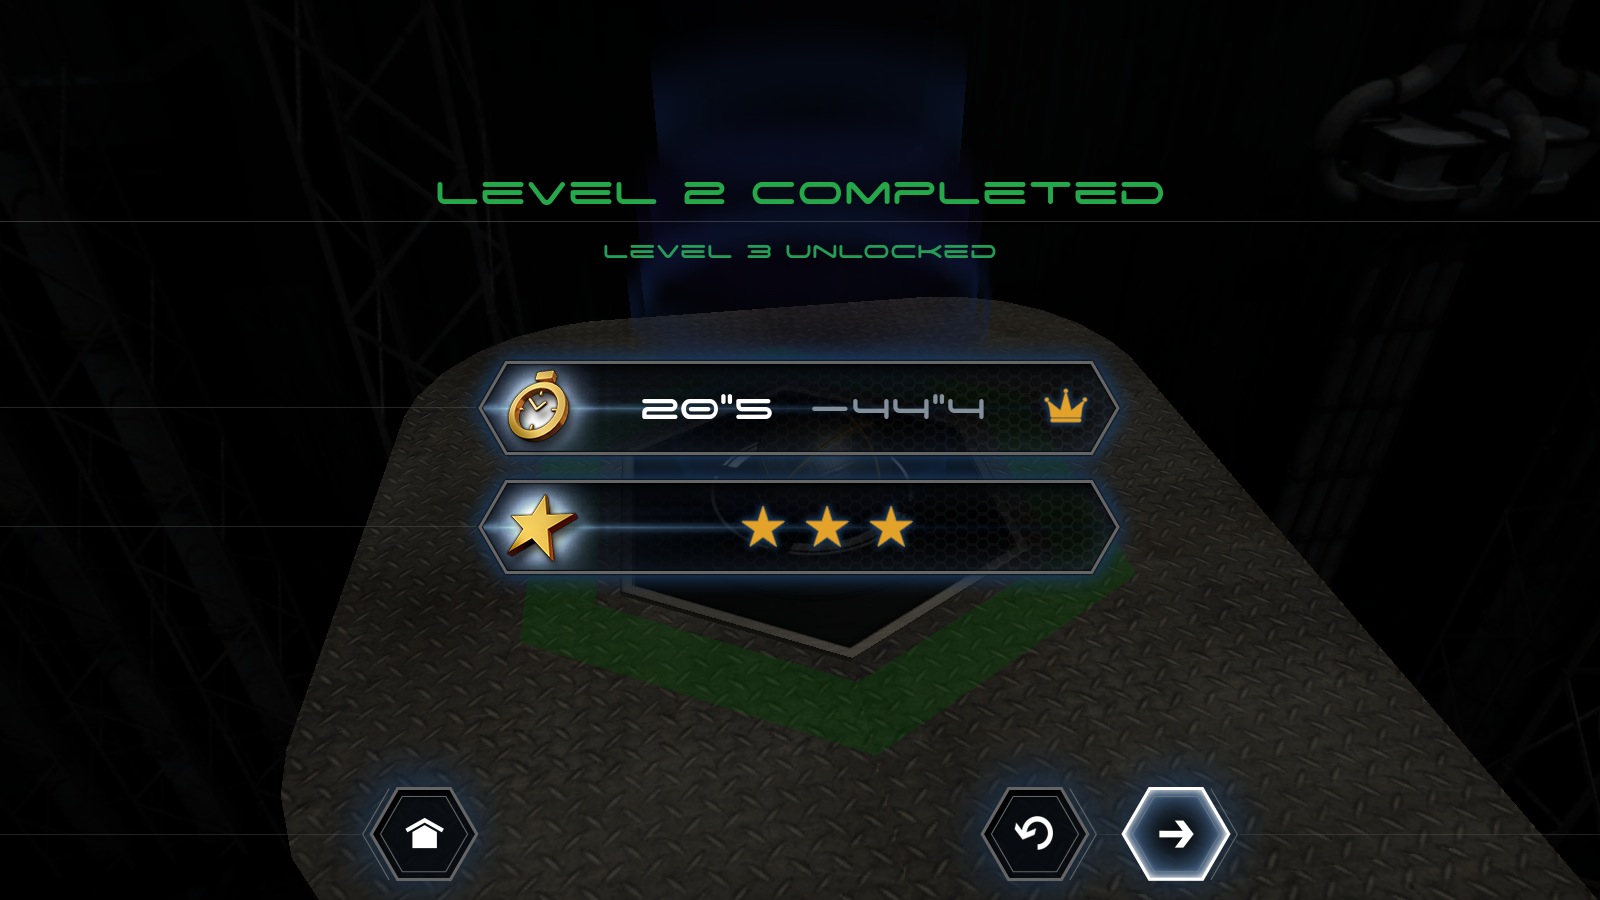 Vitrun 1.2 : Level completed